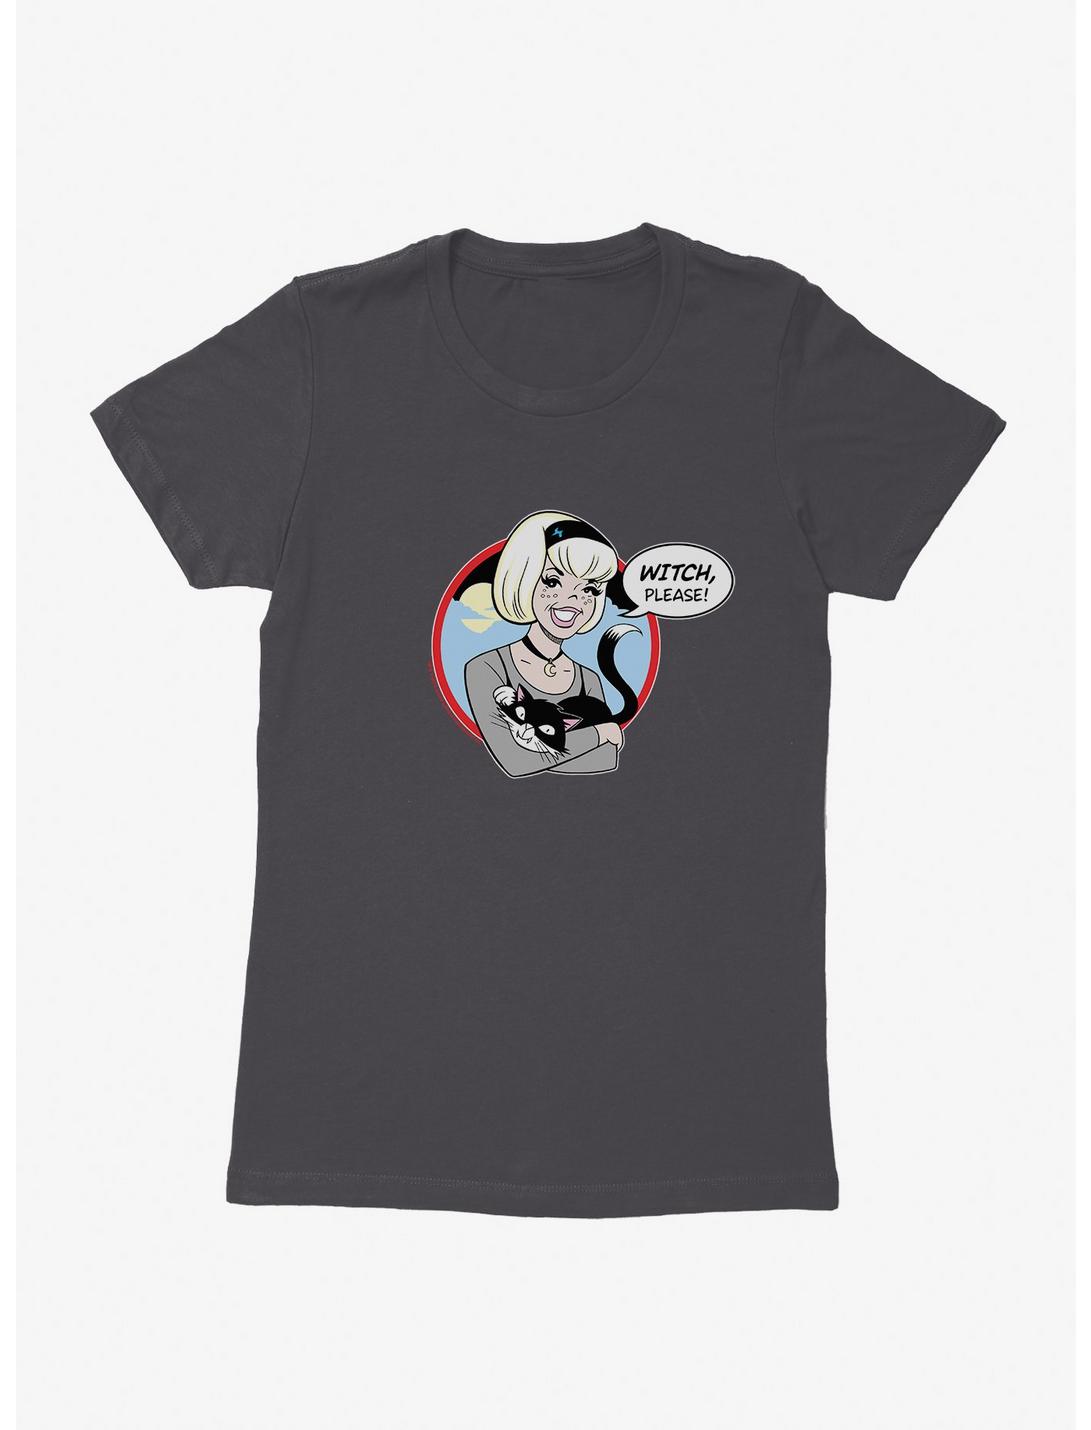 Archie Comics The Chilling Adventures Of Sabrina Witch Please Womens T-Shirt, HEAVY METAL, hi-res